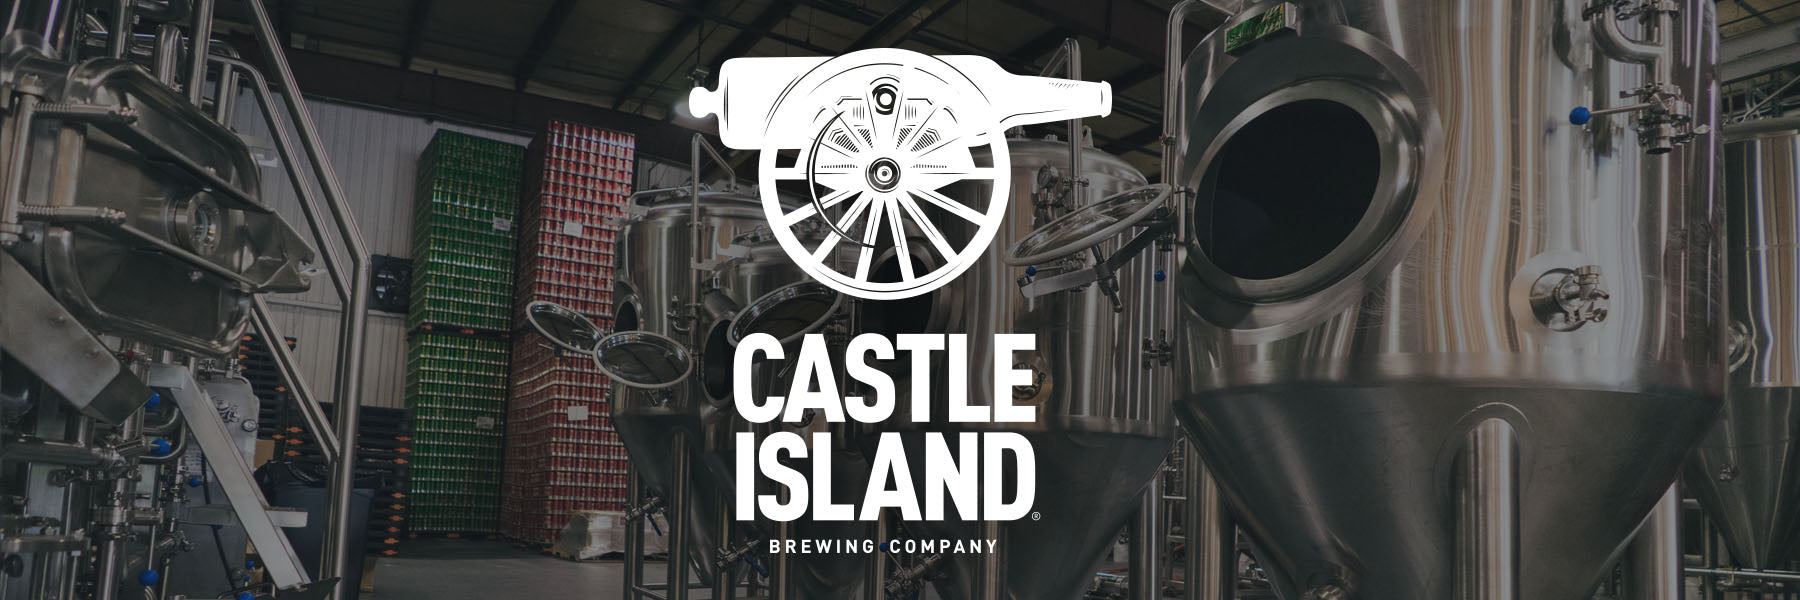 Castle Island Brewing Co. | 5bbl Pilot Brewhouse